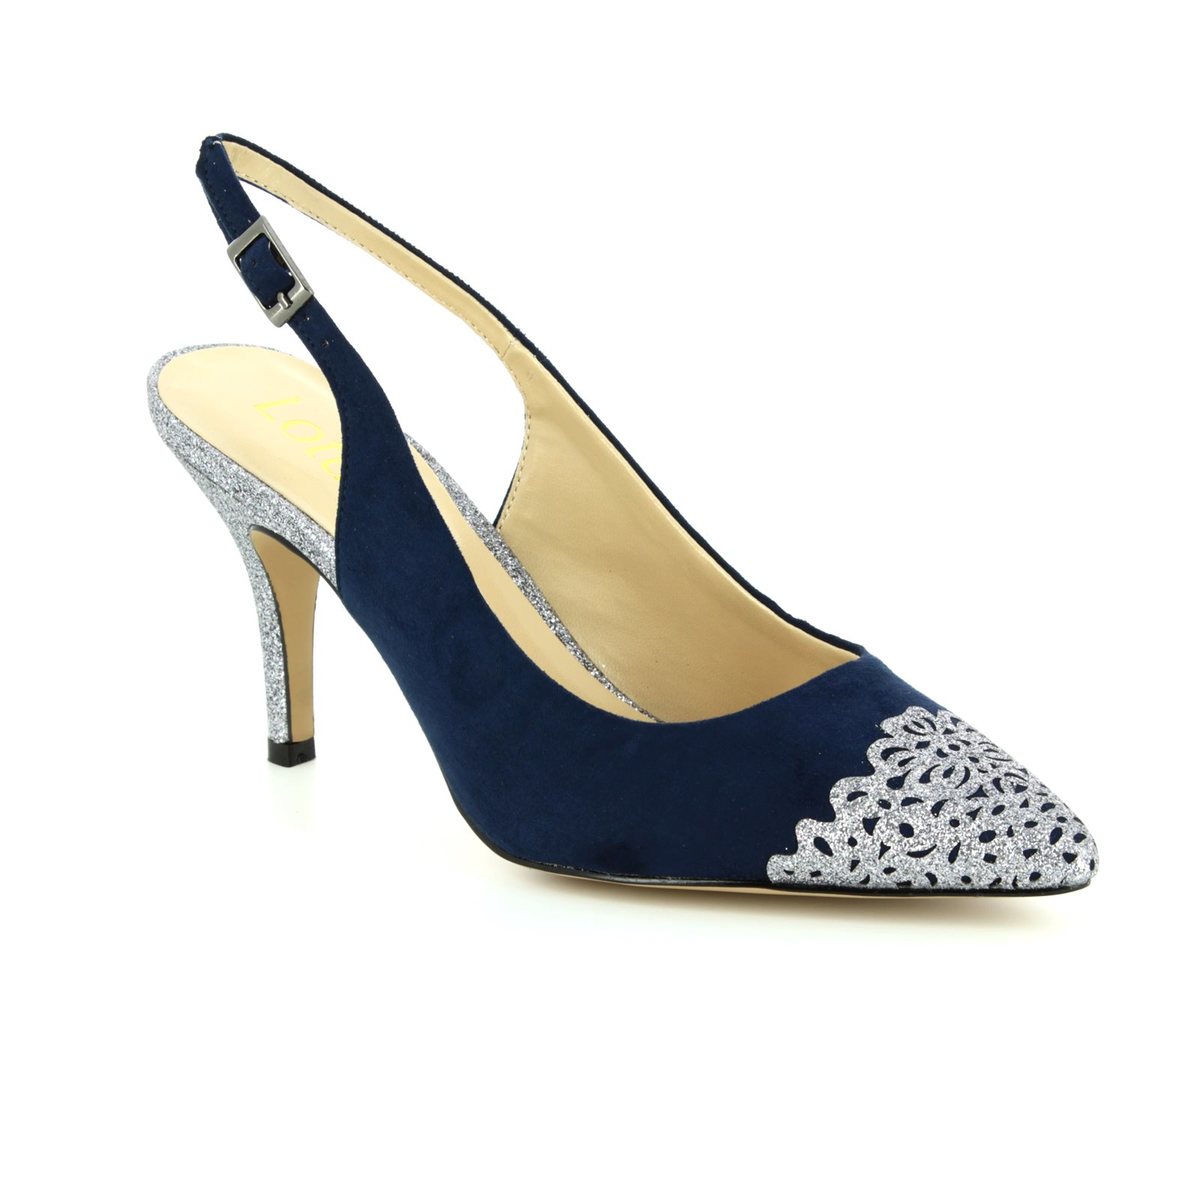 navy and white high heel shoes